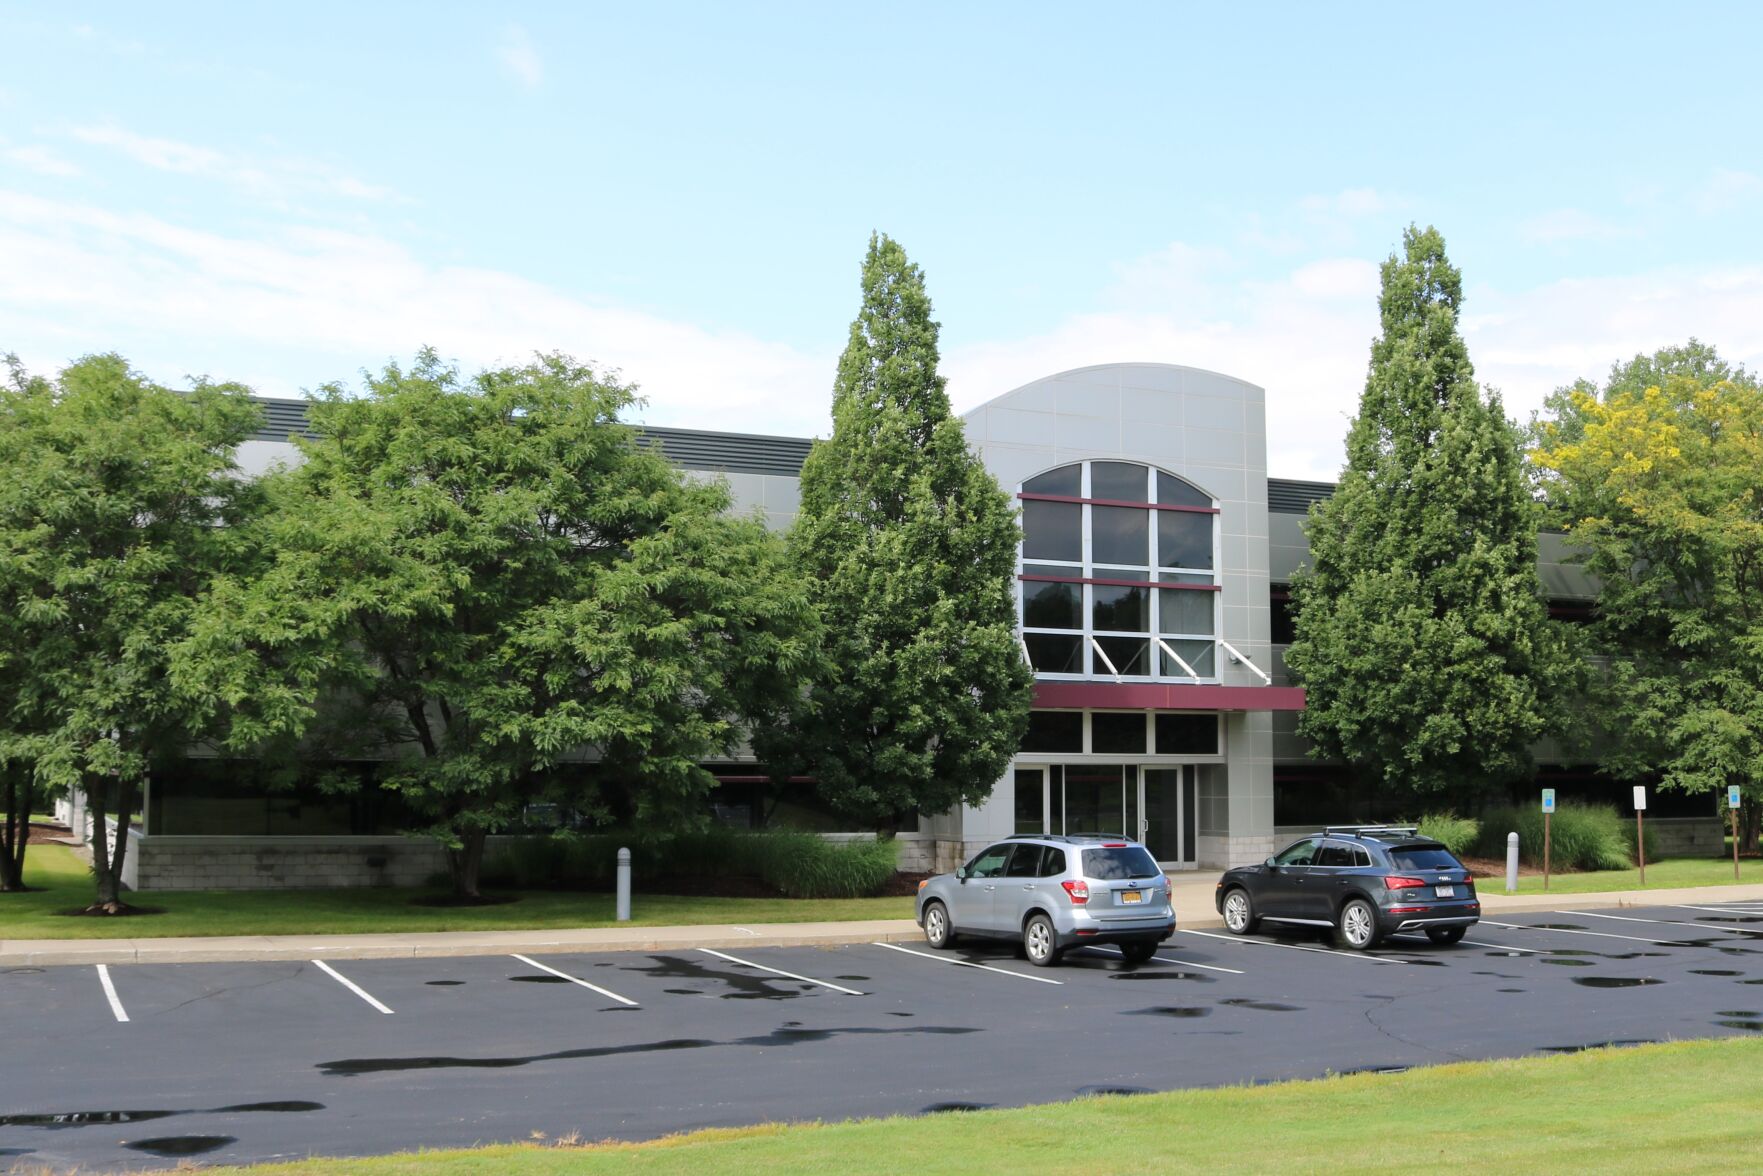 Tompkins County poised for manufacturing boom with Menlo Micro and Micron investments | Fingerlakes1.com